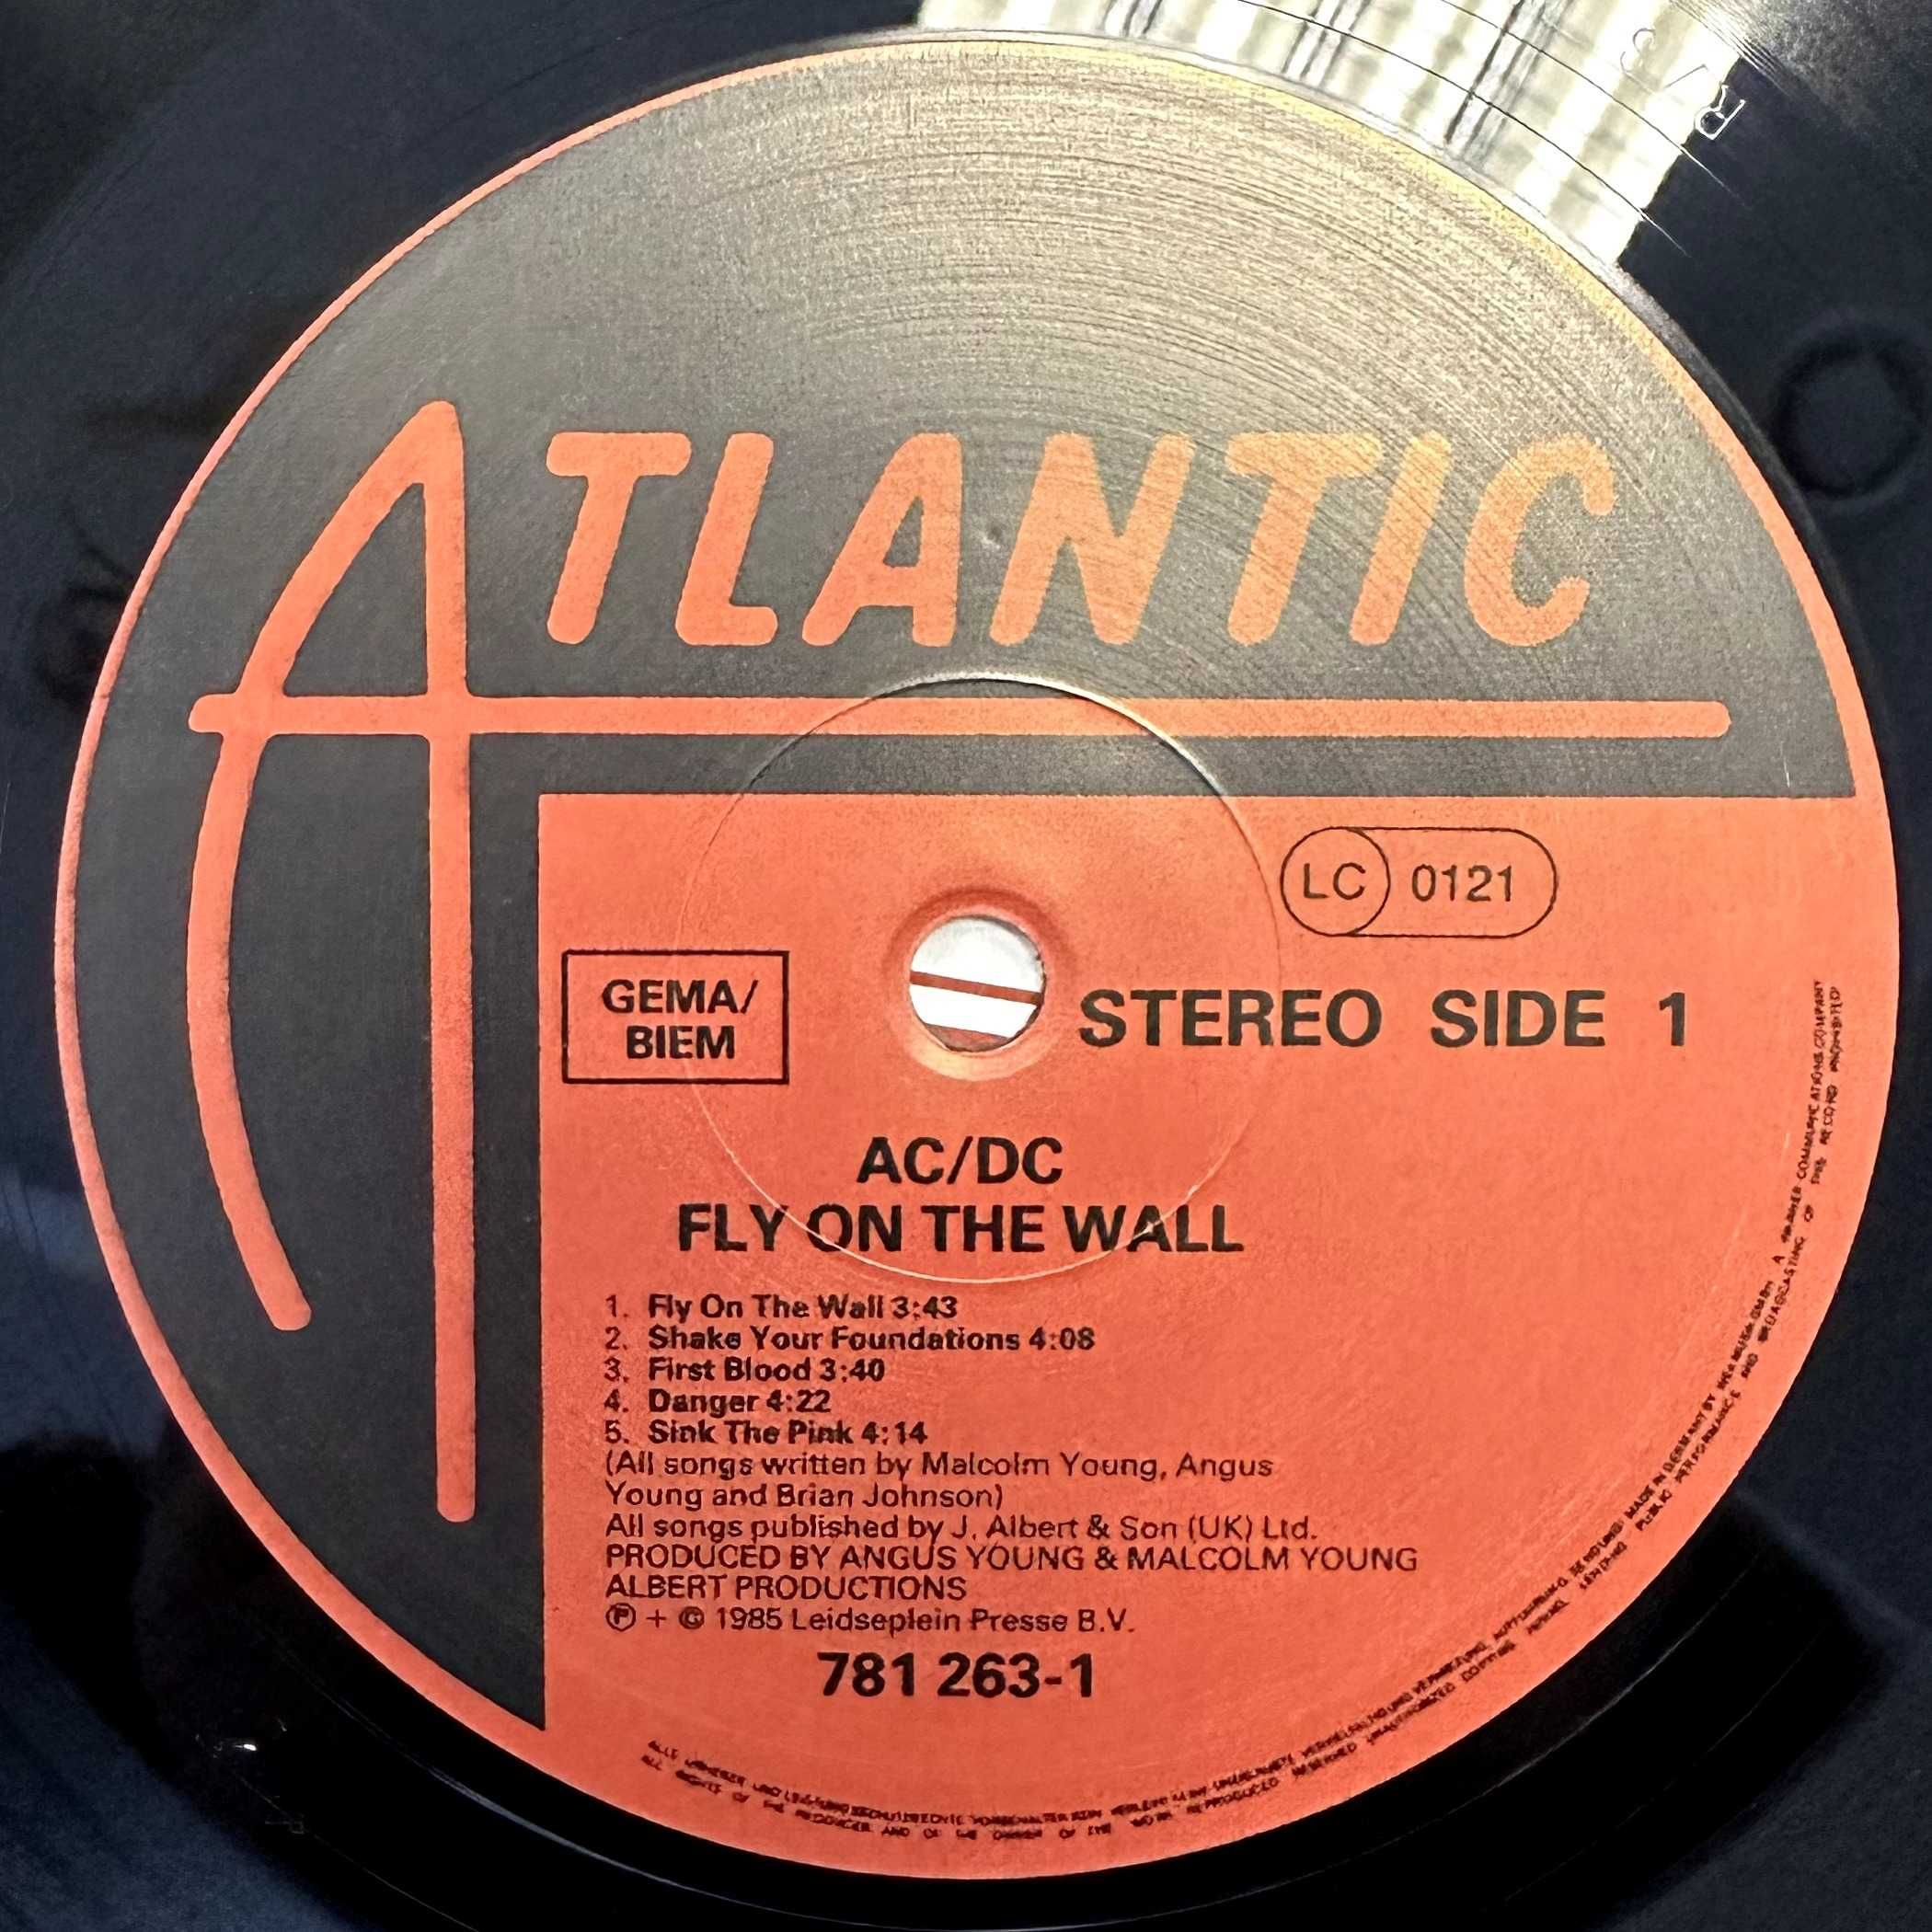 AC/DC - Fly on the Wall (Vinyl, 1985, Germany)